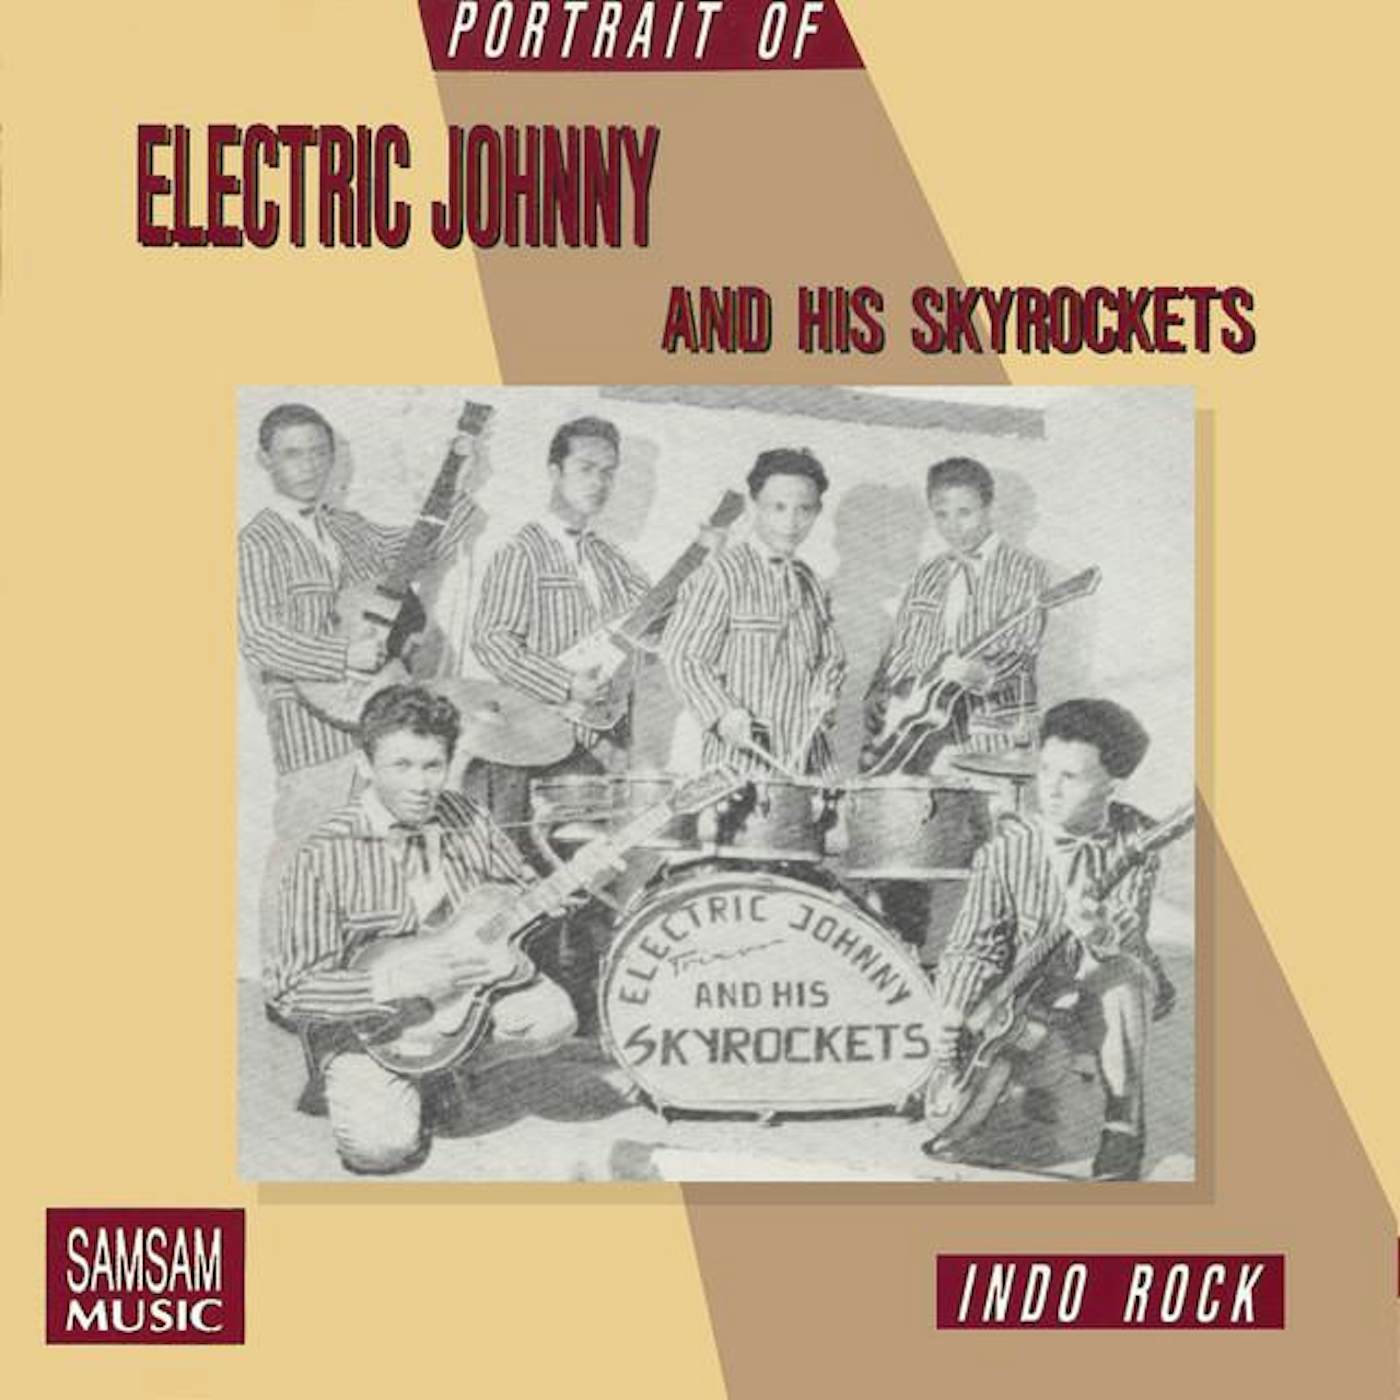 Electric Johnny and his Skyrockets